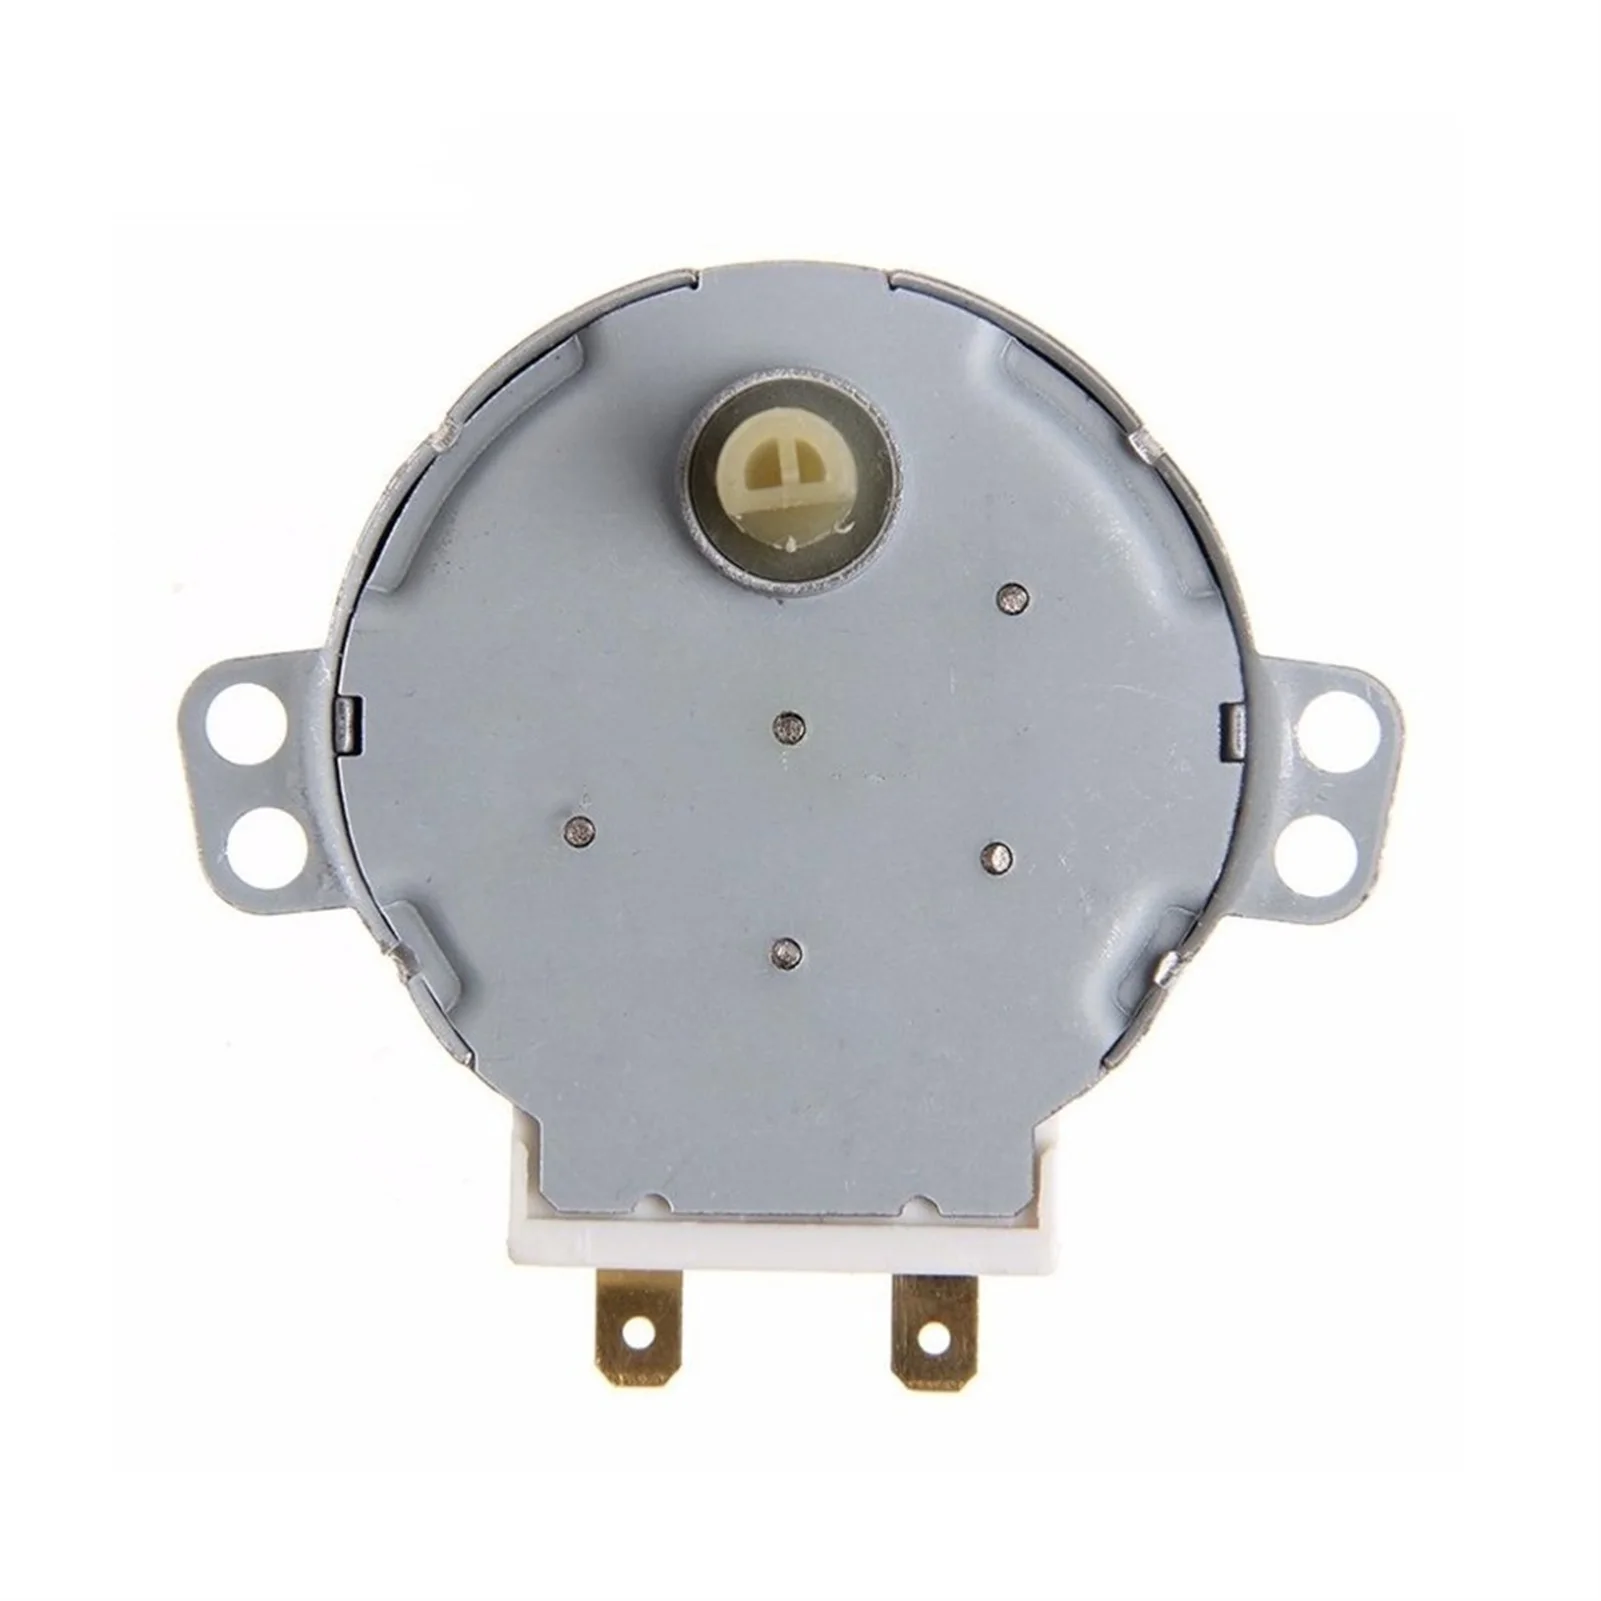 

MDS-4A Motor, 49TYZ-A2 Motor, TYJ50-8A7 Synchronous Motor, Microwave Oven Turntable Motor, Tray Motor, 220V Flat Shaft Motor